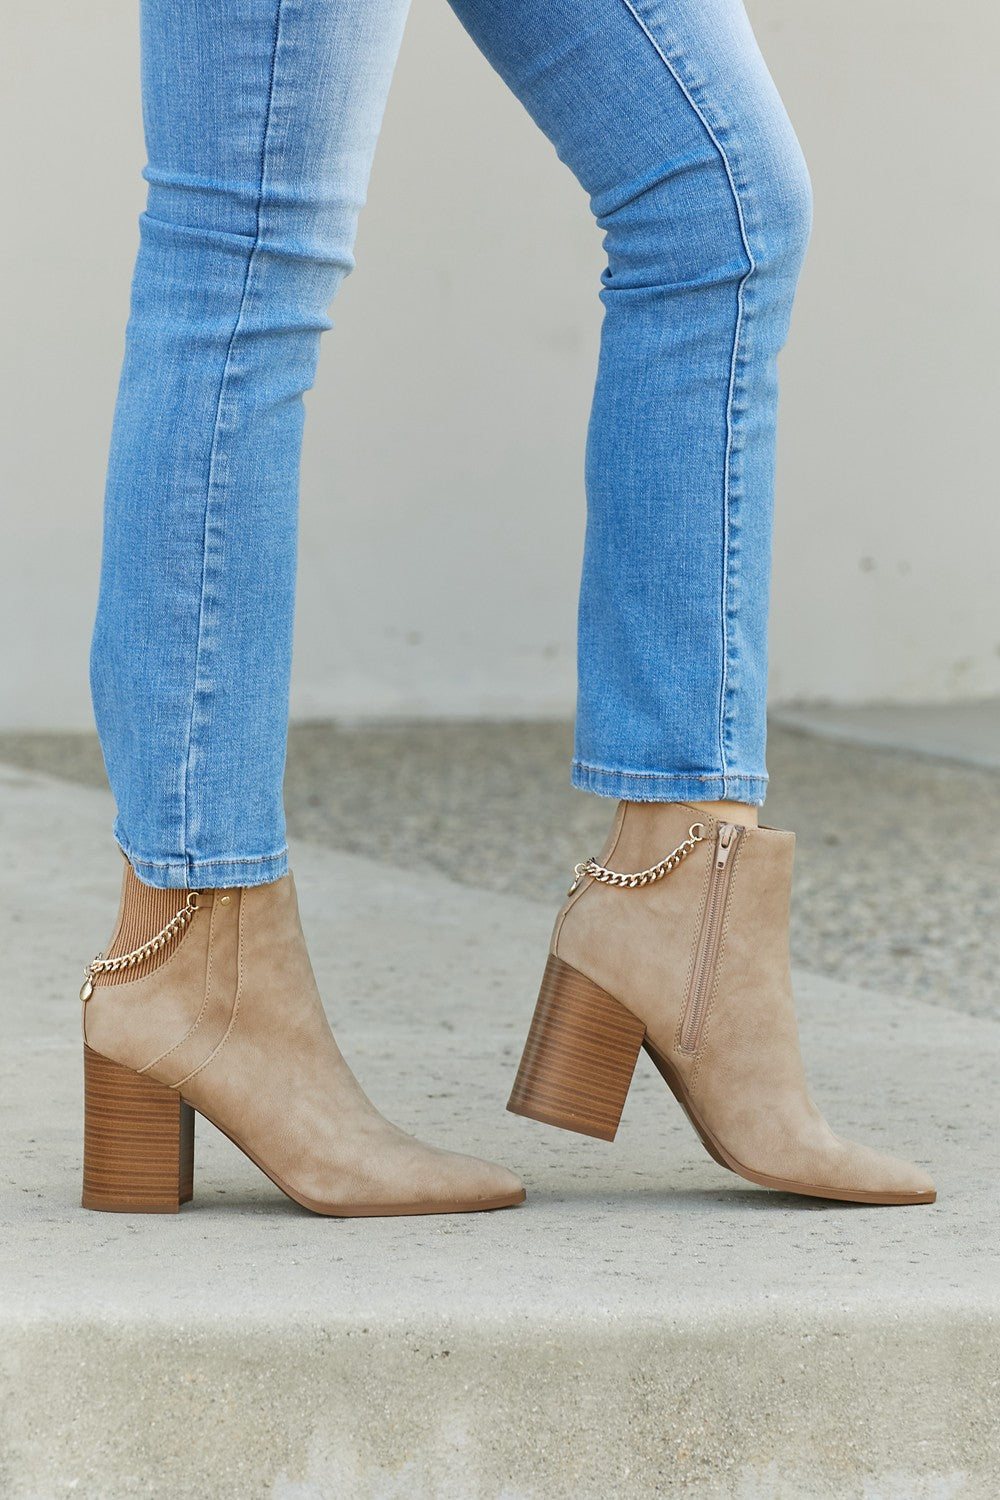 Fortune Dynamic Date Night Dreams Elastic Back Chain Detail Booties